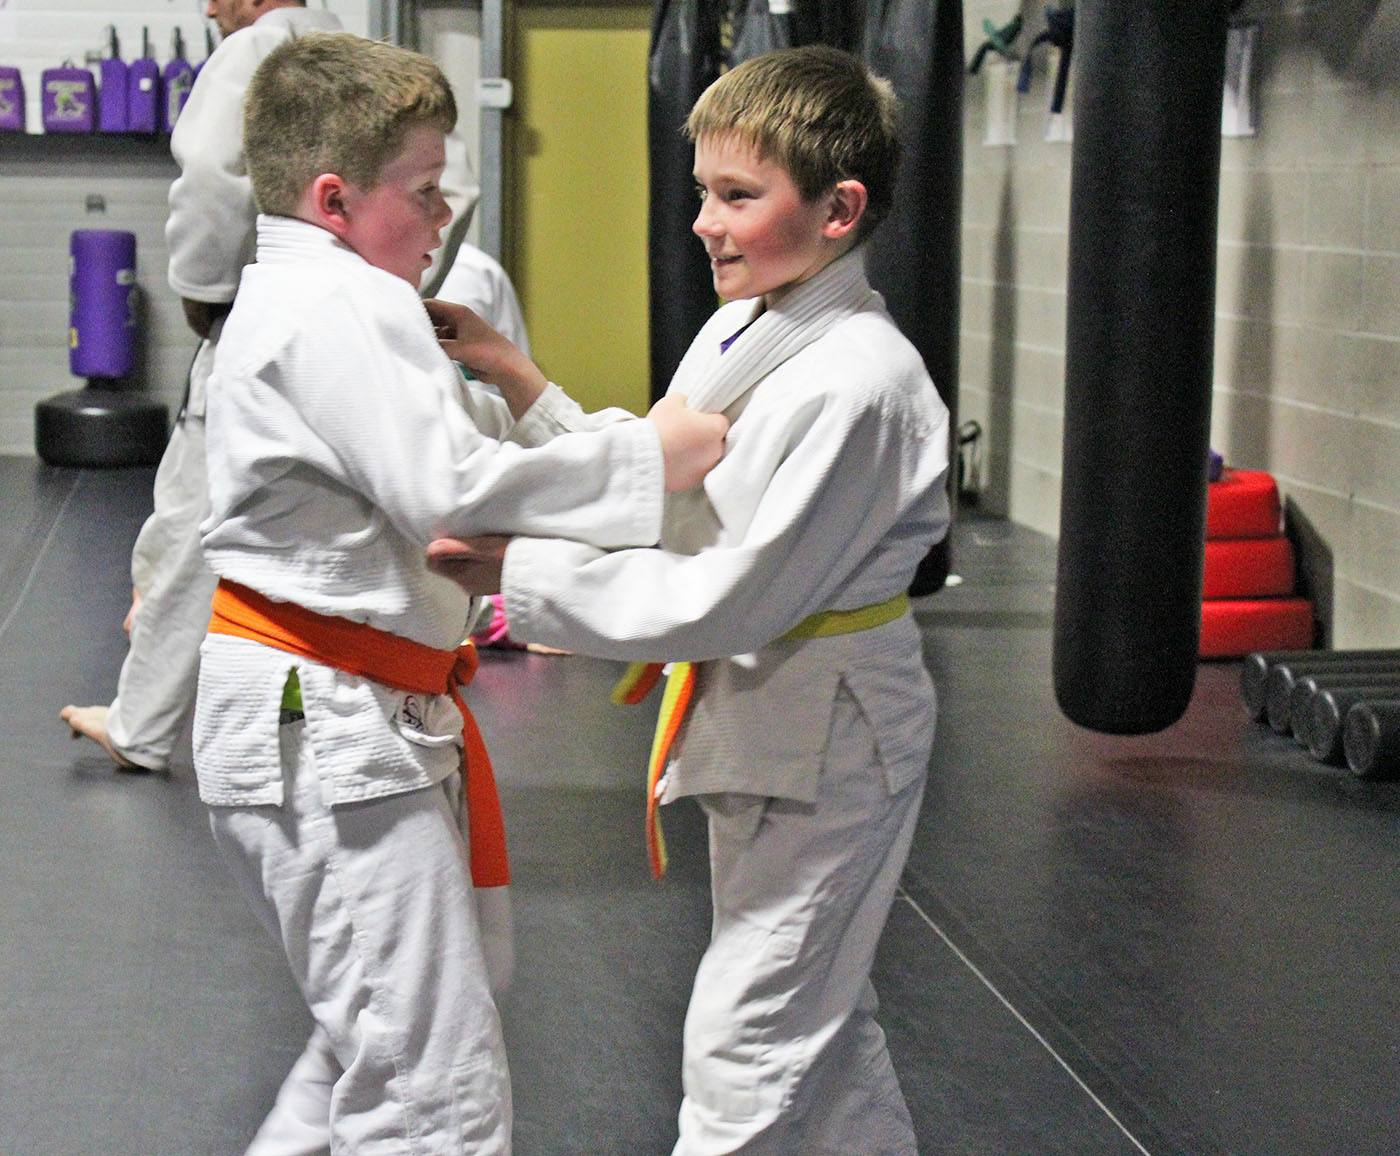 JUDO - Students Garrett Van Seggelen and Ethan MacMillan practice at their Tuesday night Judo class. The local Club is looking for a permanent space to call their own.